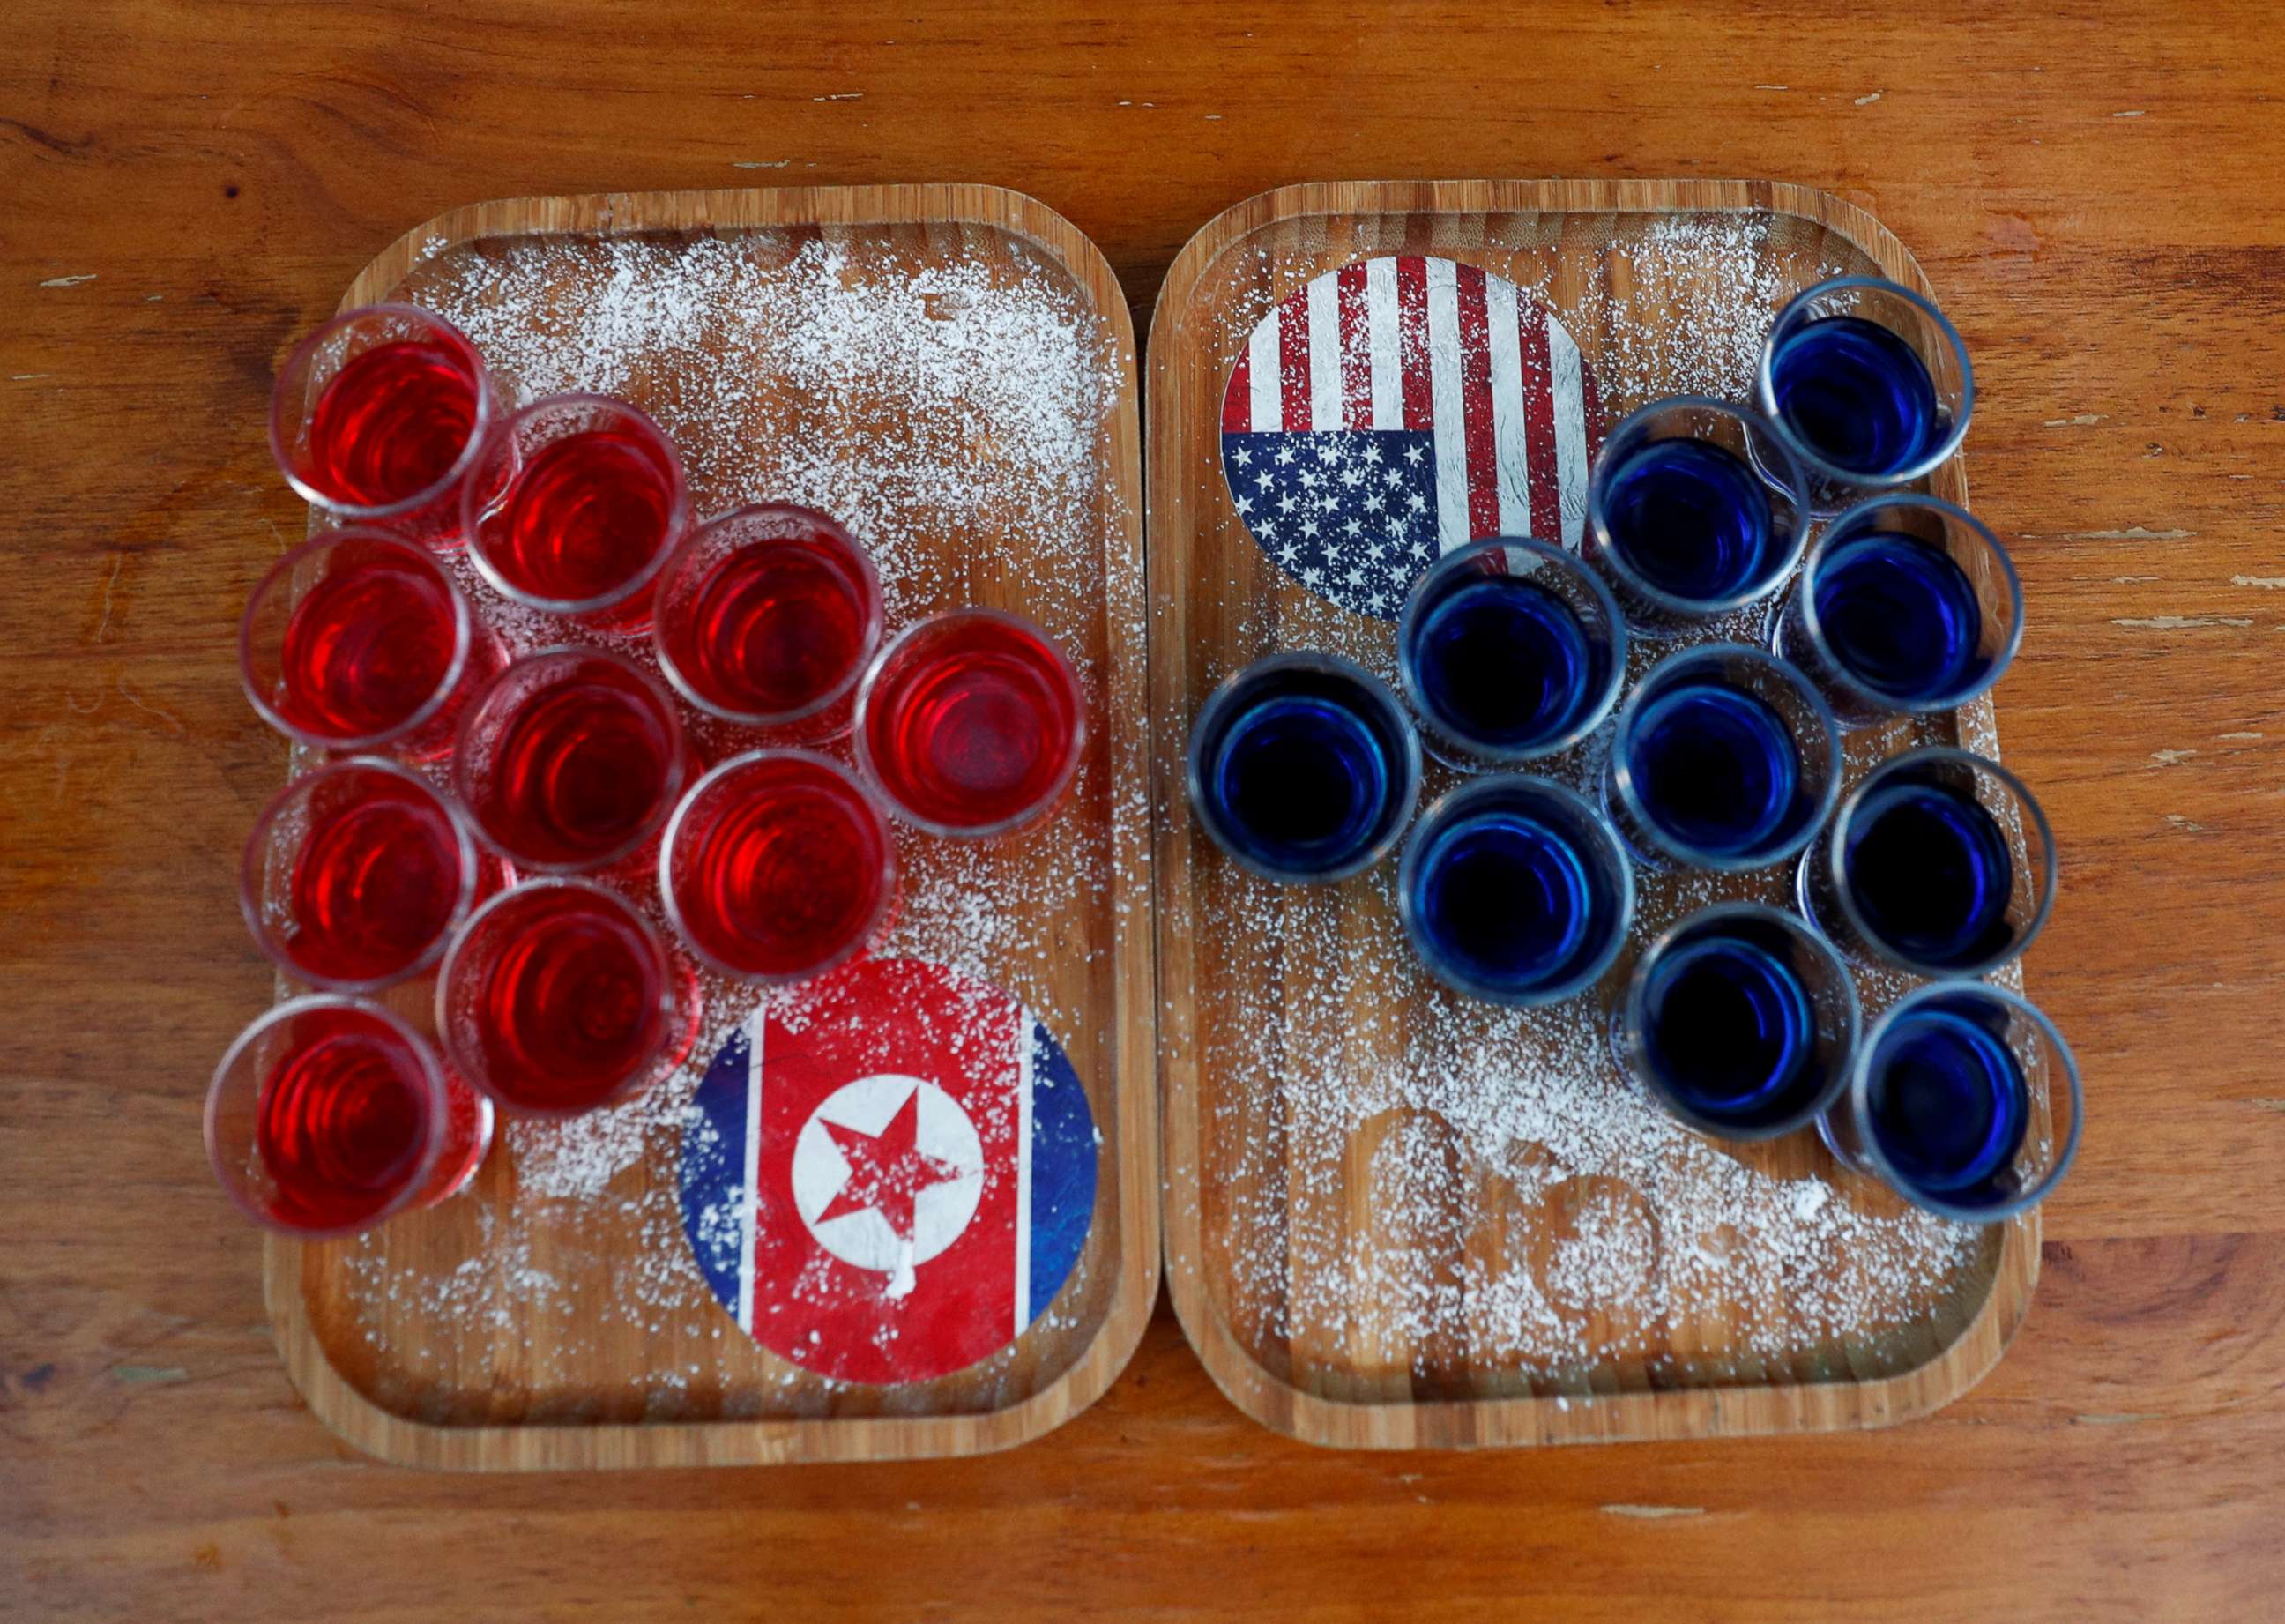 PHOTO: Special red and blue shots offered at Escobar bar to mark the summit meeting between U.S. President Donald Trump and North Korean leader Kim Jong Un, are displayed on a table in Singapore, June 4, 2018.